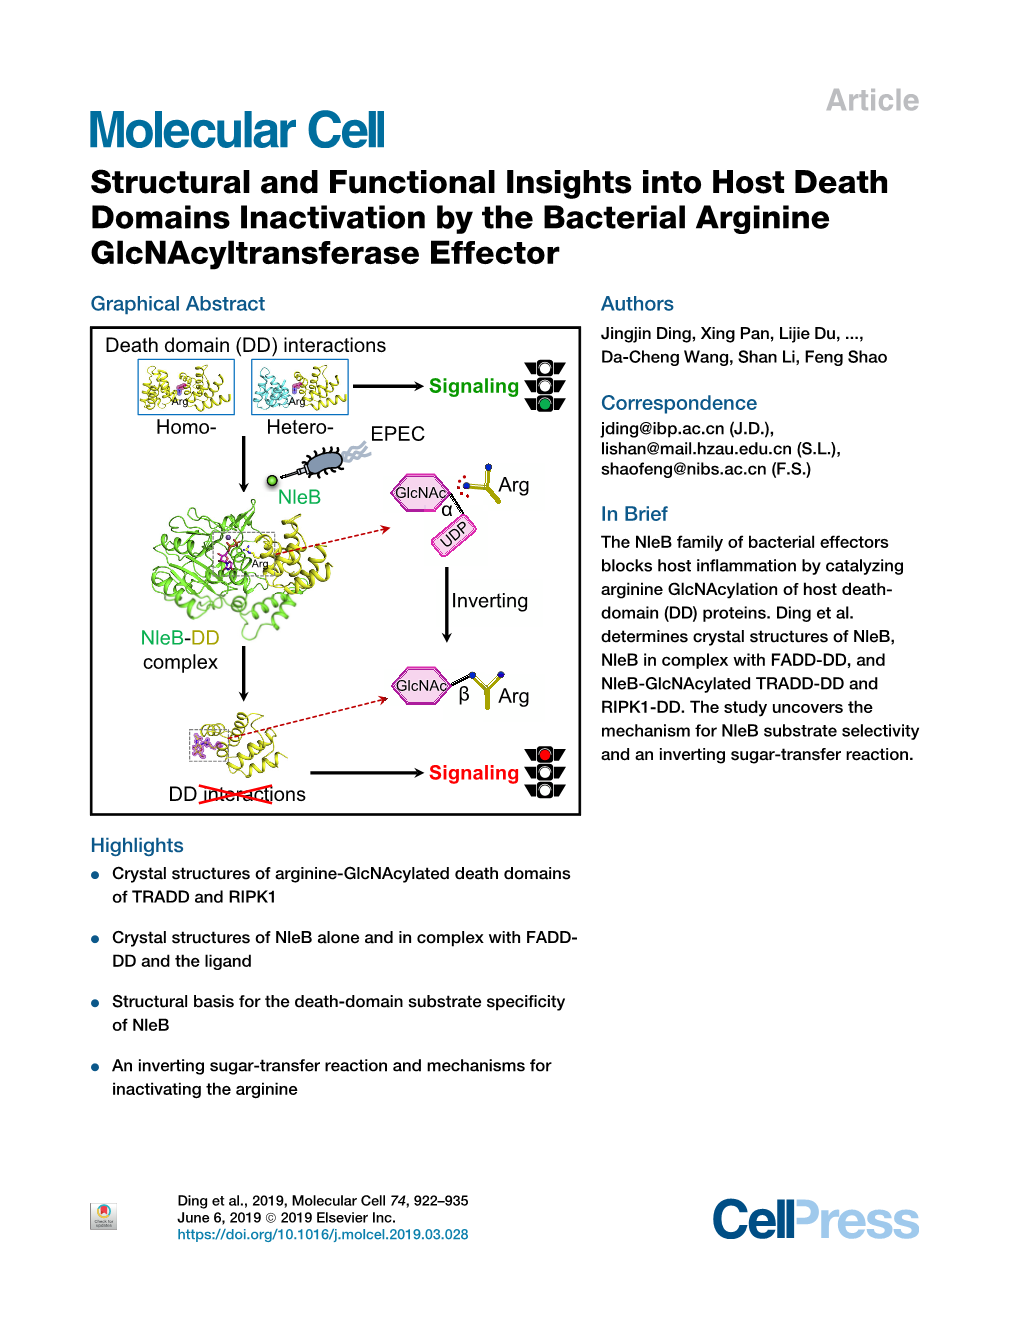 Structural and Functional Insights Into Host Death Domains Inactivation by the Bacterial Arginine Glcnacyltransferase Effector